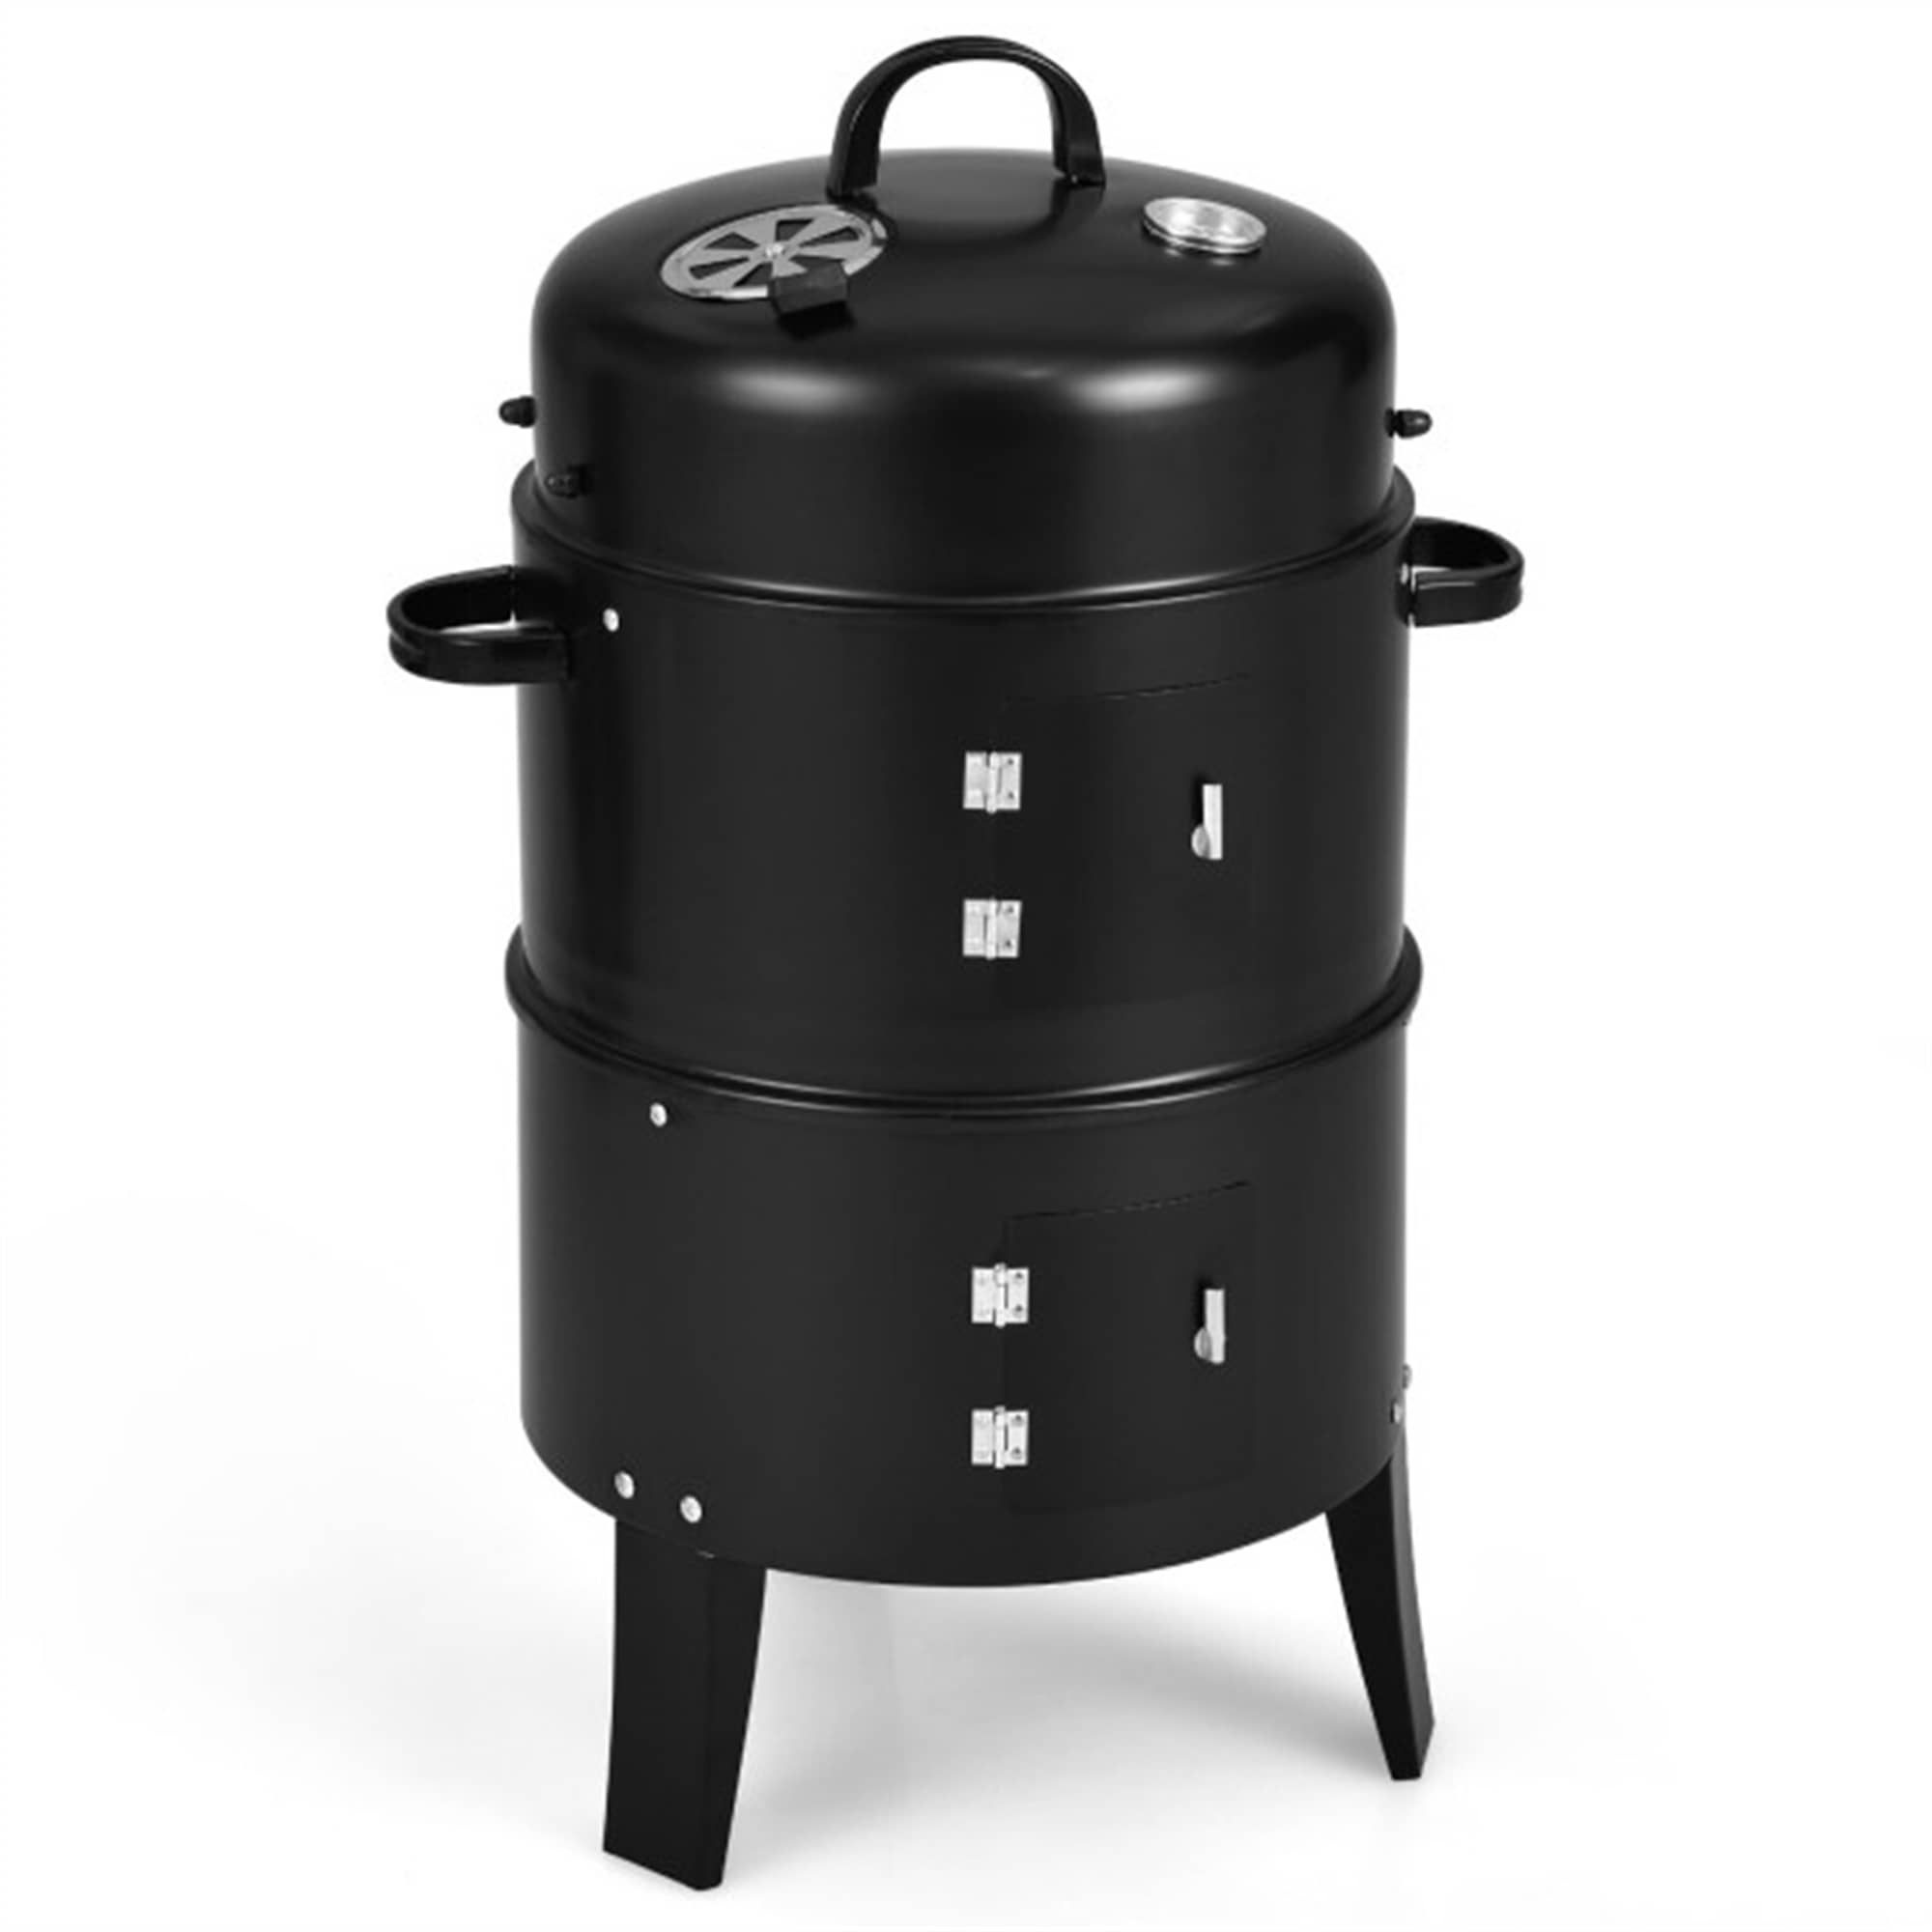 CASAINC 3-in-1 Charcoal BBQ Grill Cambo with Built-in Thermometer